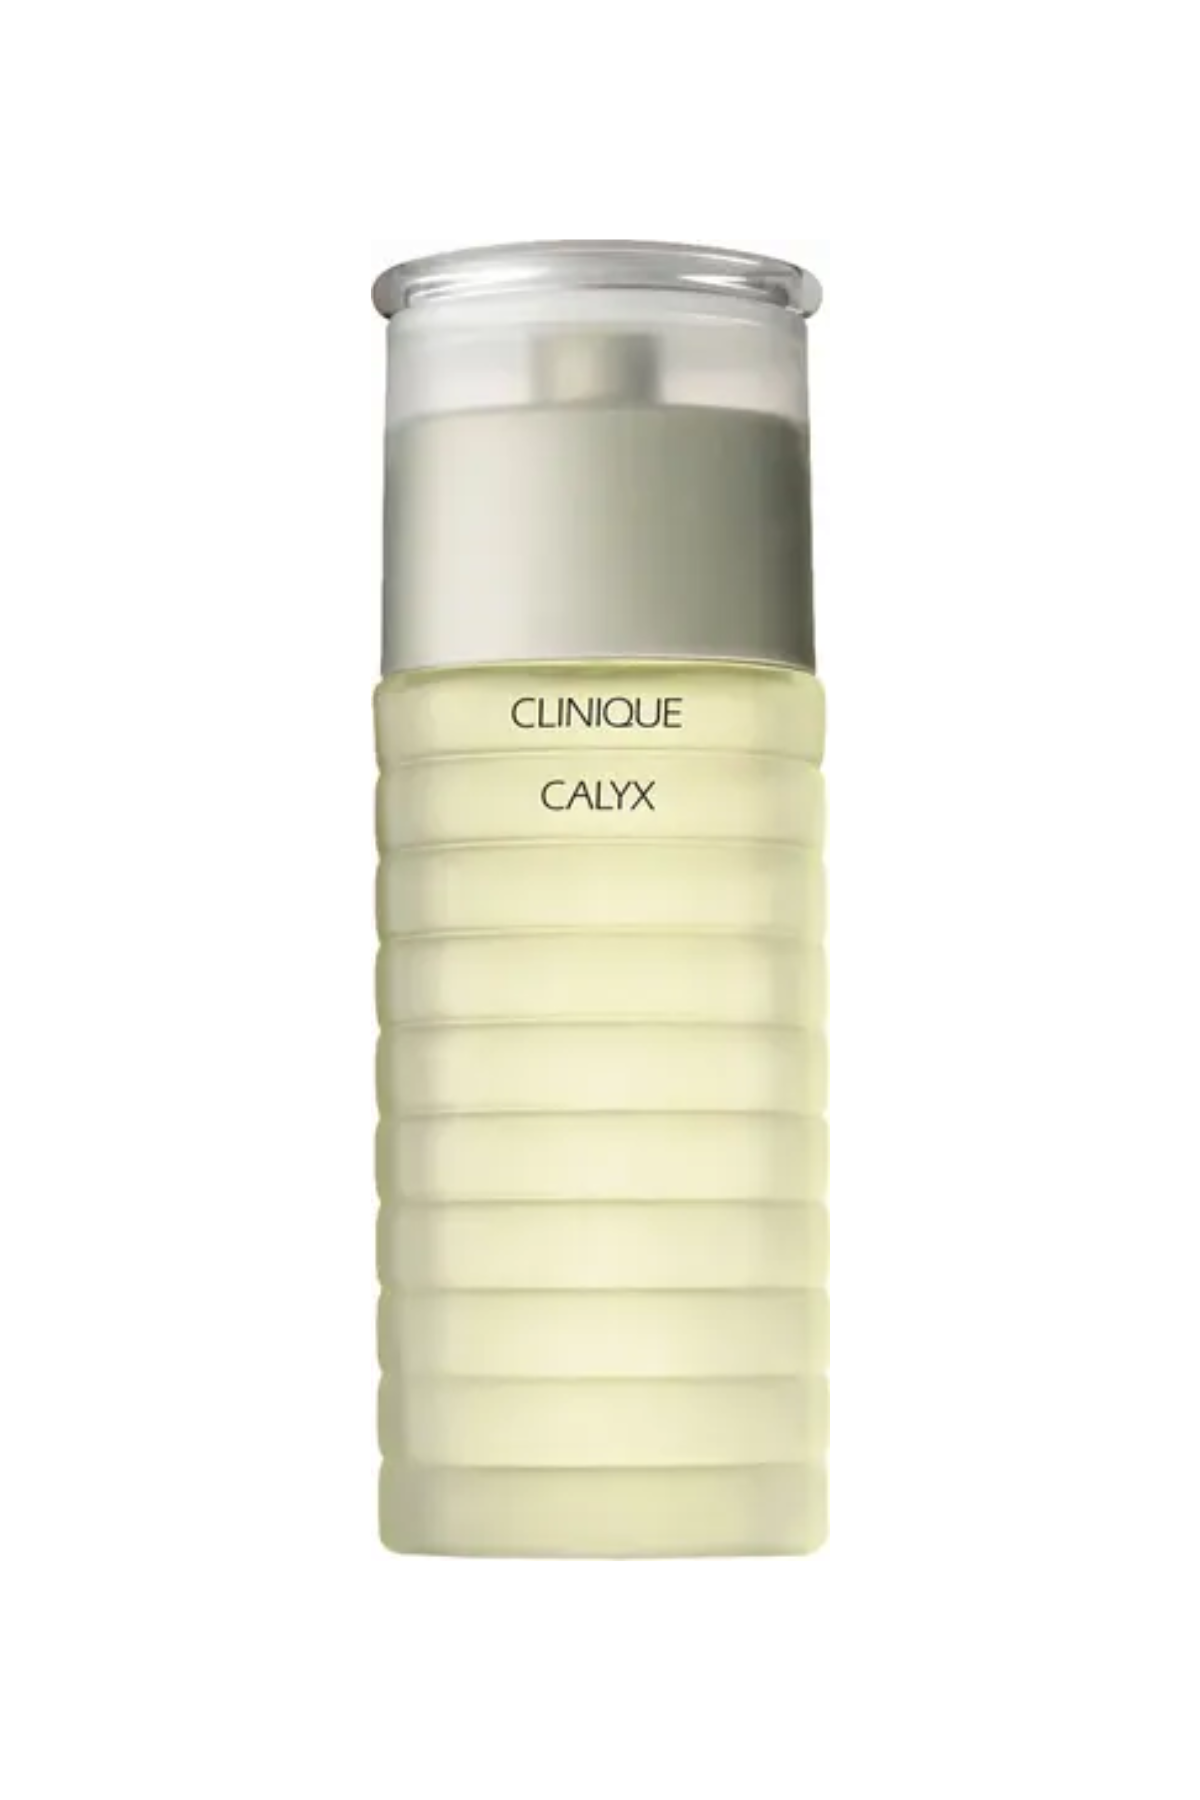 A bottle of Clinique Calyx perfume against a white background.